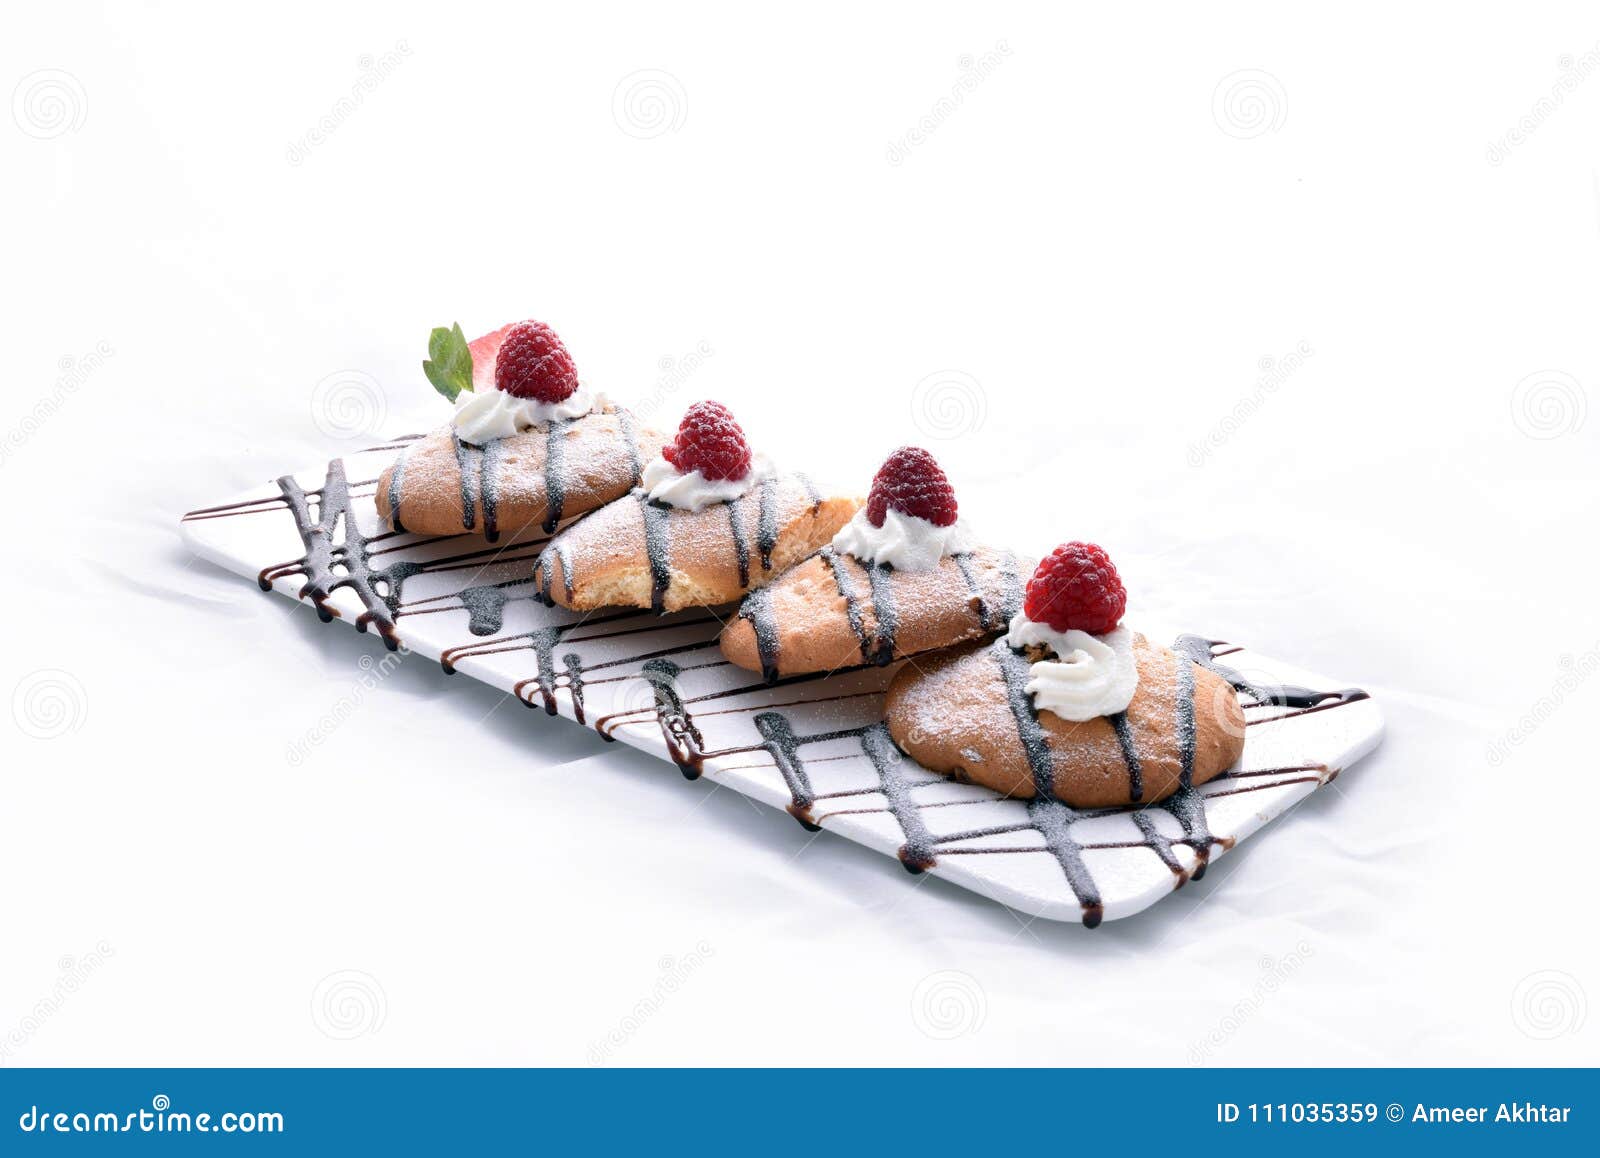 Diet Dessert- Oats Cookies With Cream, Chocolate And Berries Stock Image - Image of creame ...